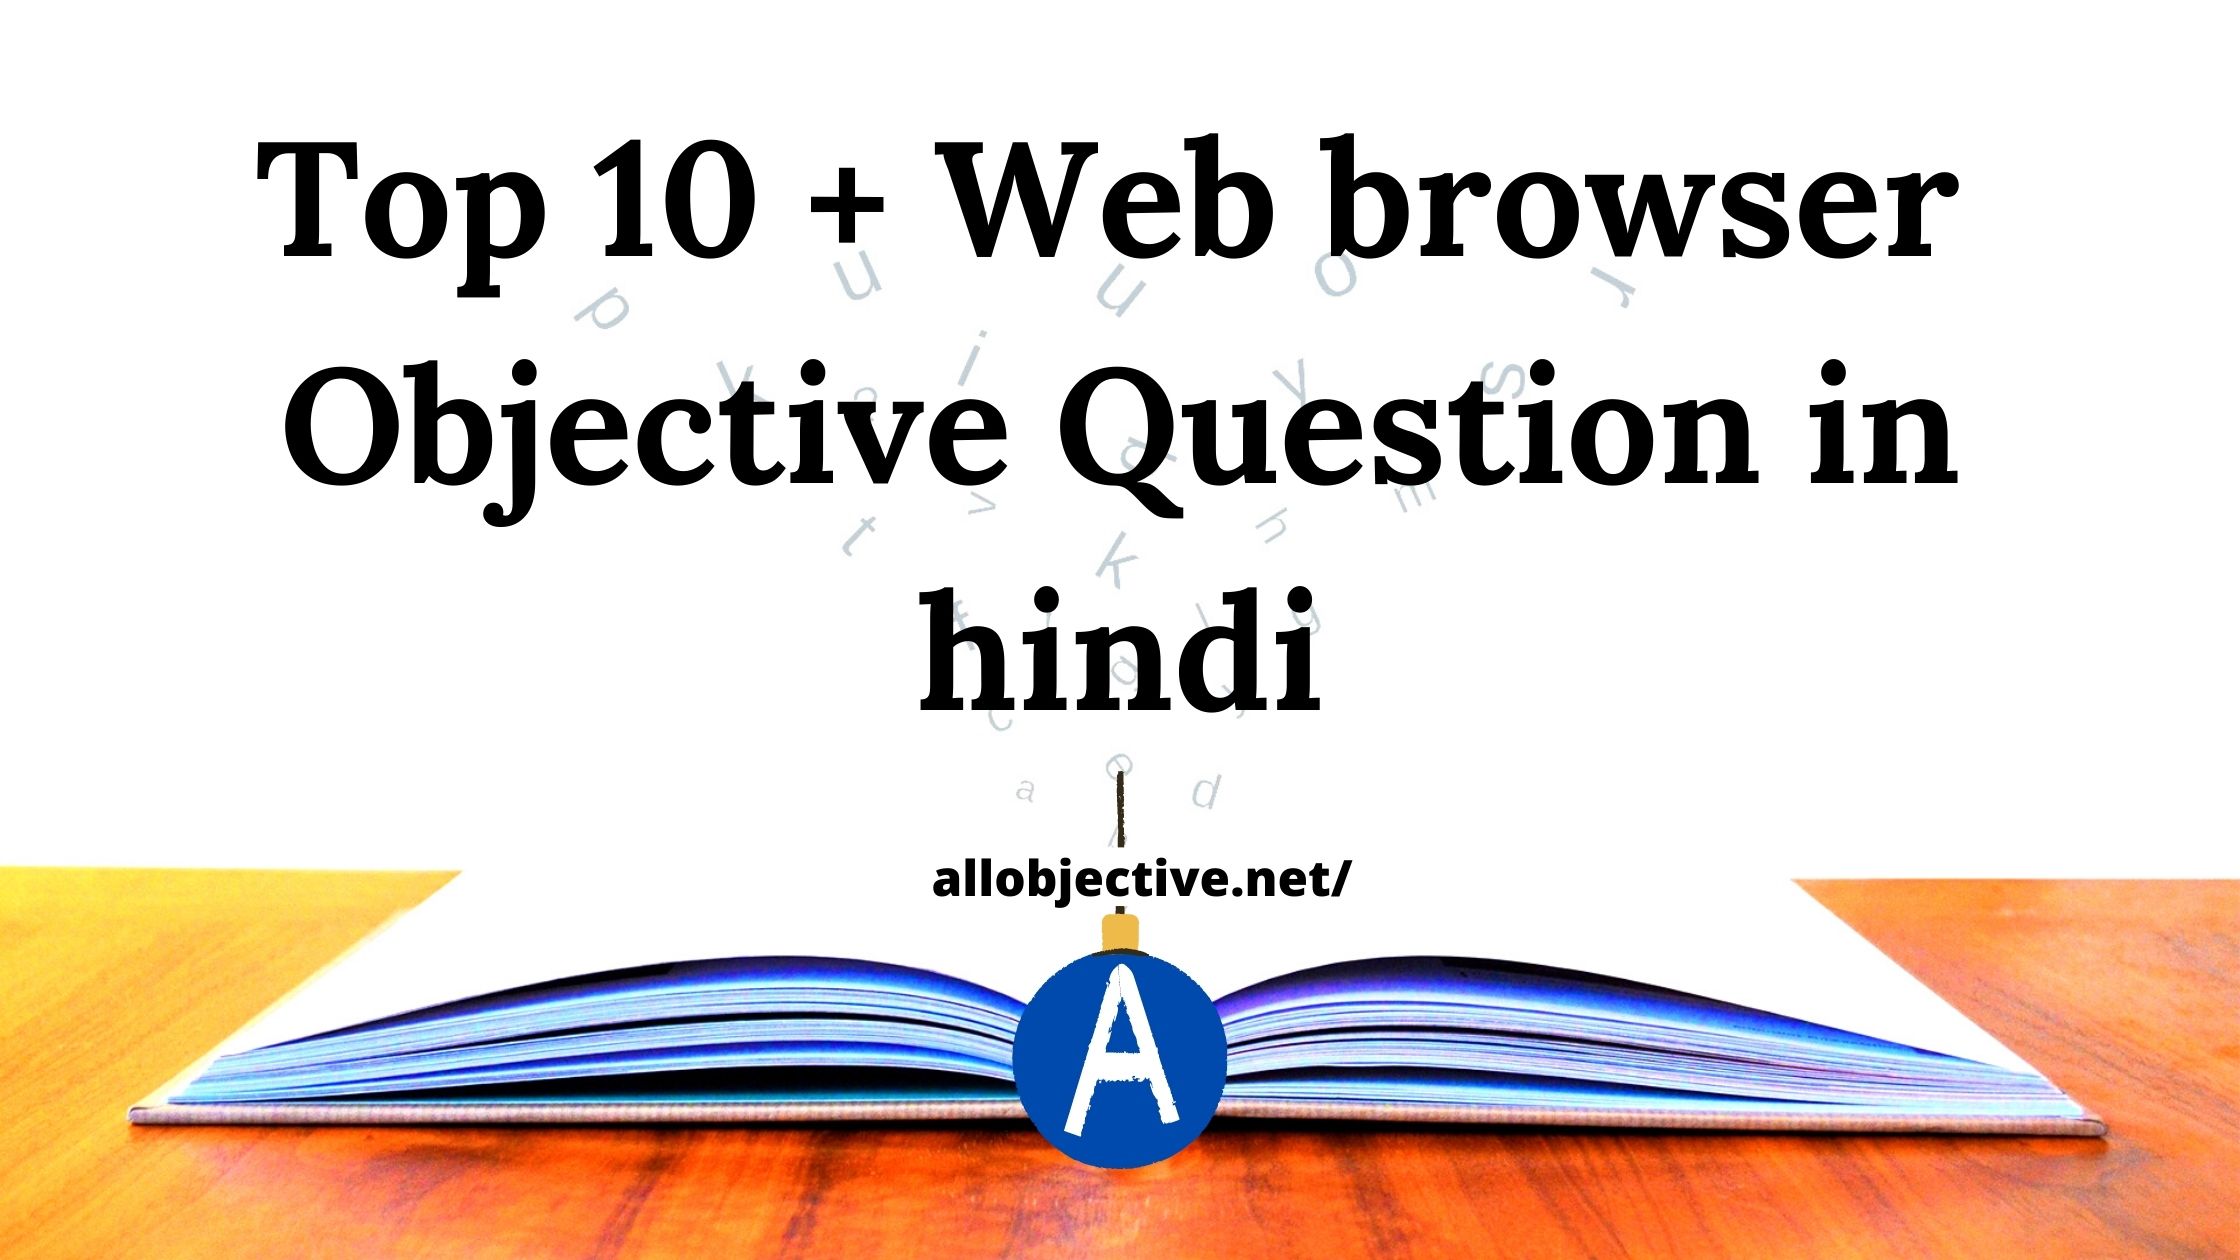 Web browser Objective Question in hindi